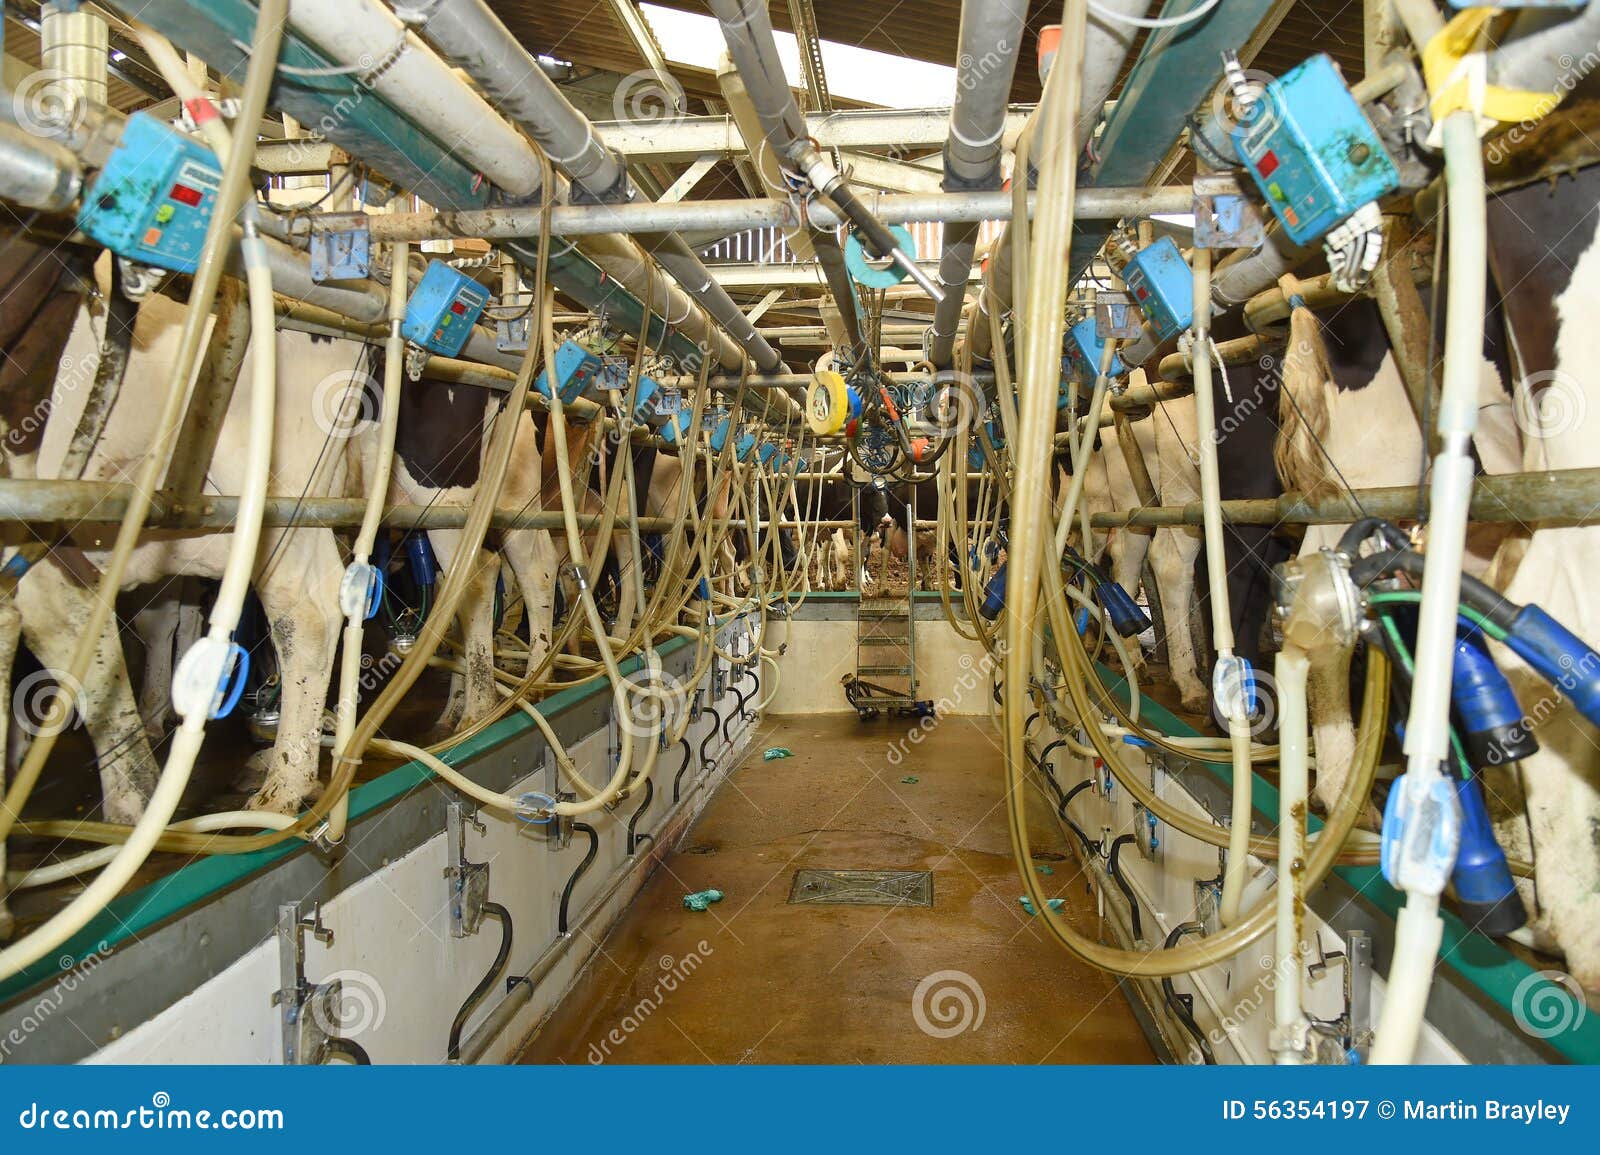 dairy farming business plan – very profitable business to